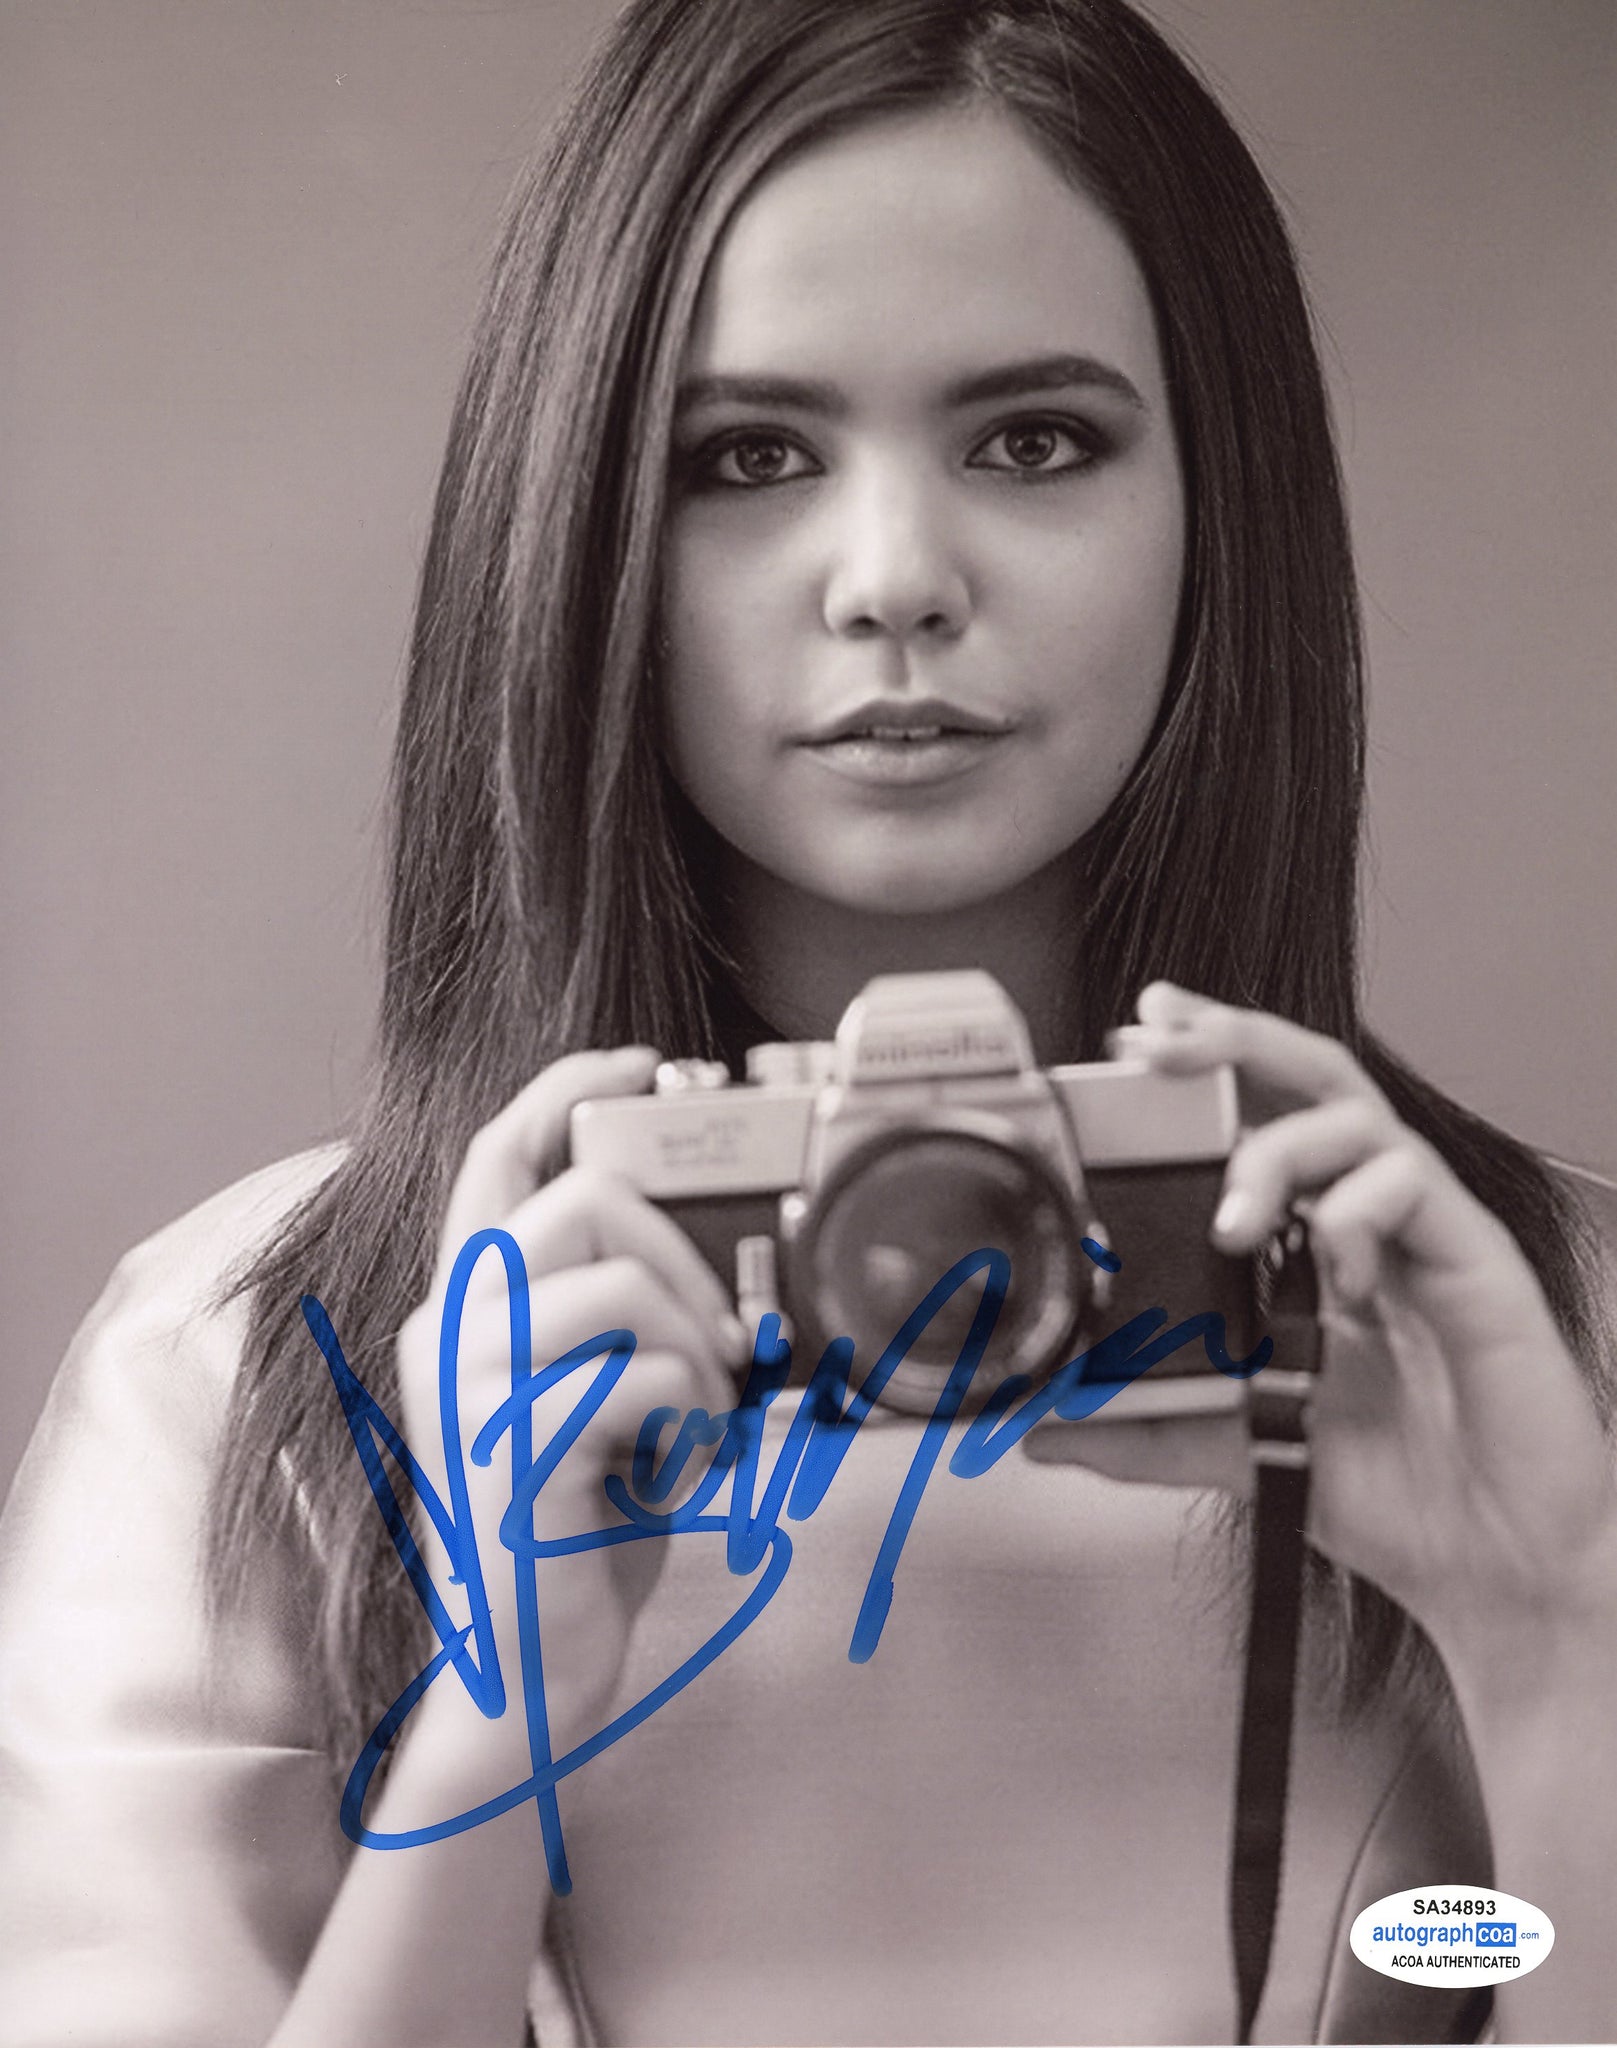 Bailee Madison Sexy Signed Autograph 8x10 Photo ACOA #71 - Outlaw Hobbies Authentic Autographs